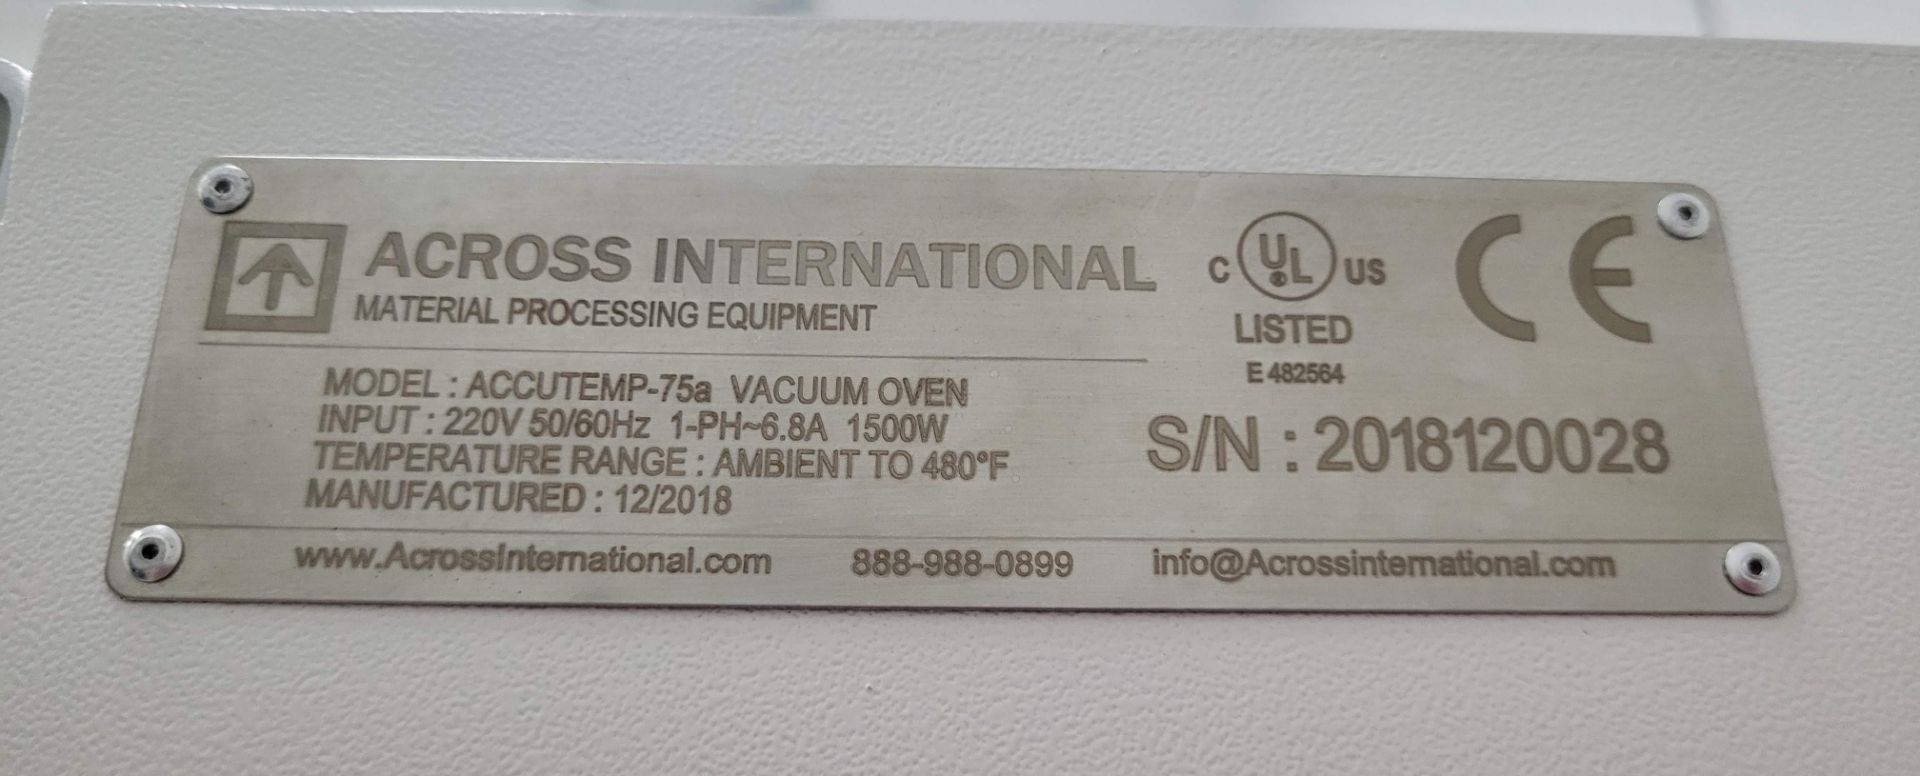 ACROSS INTERNATIONAL ACCUTEMP-75A VACUUM OVEN,AMBIENT TO 480oF, LOW PRPOERTIONAL GAIN, PID CONTROL - Image 6 of 10